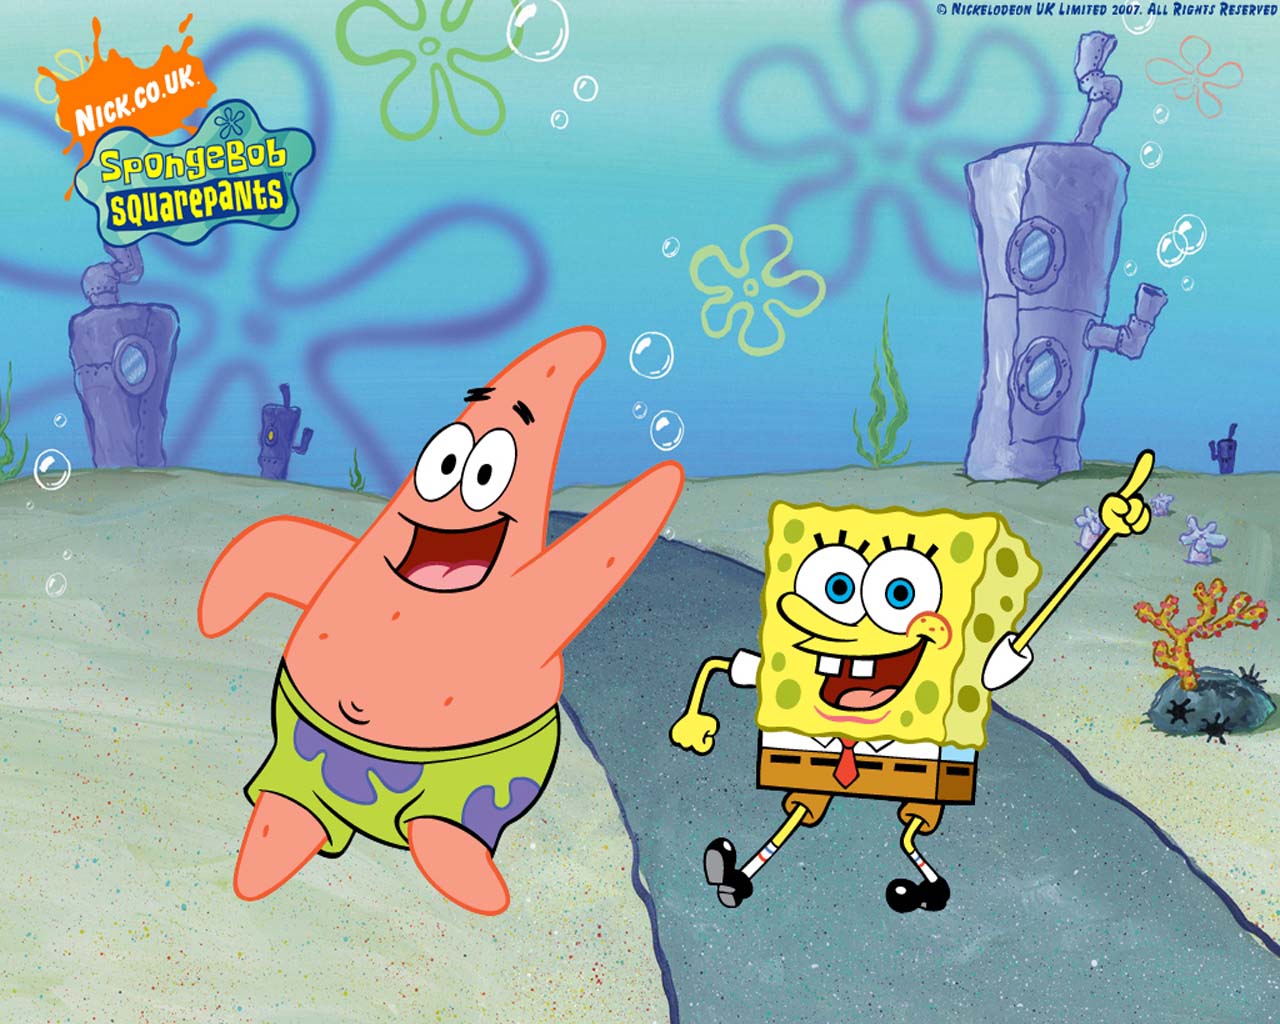 Spongebob and Patrick. This entry was posted on